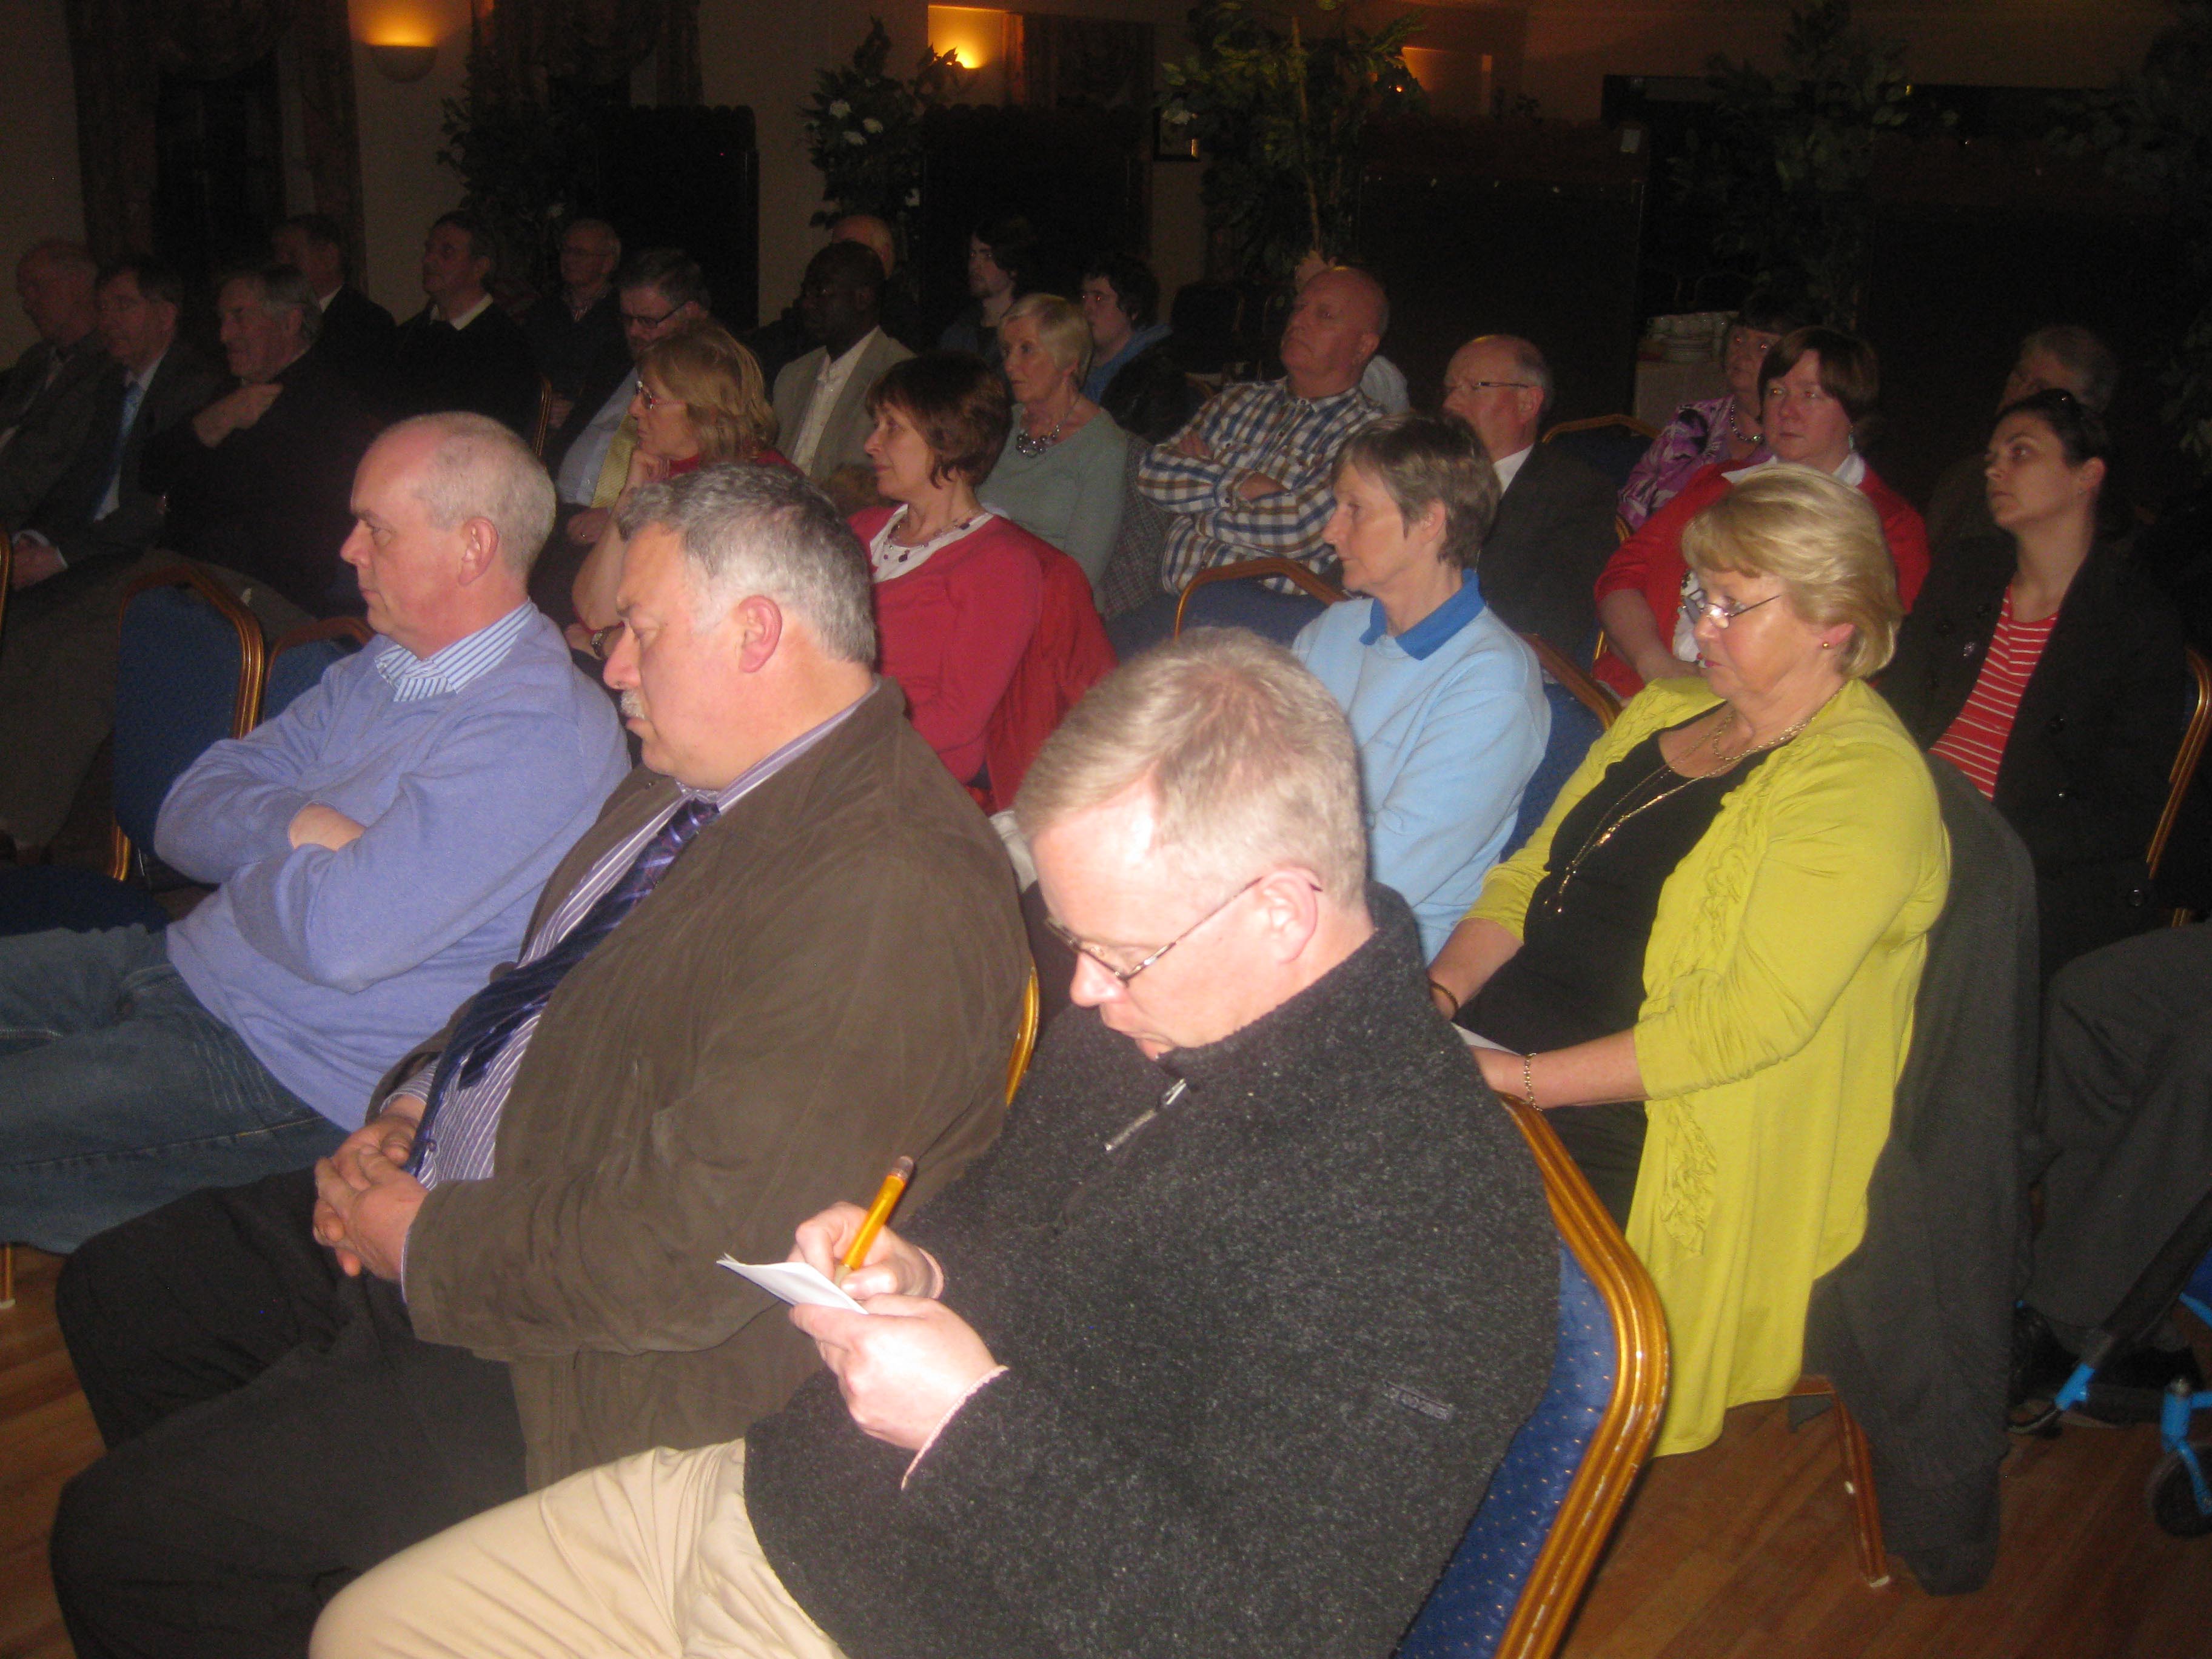 Some of the attendance2 22nd March.jpg